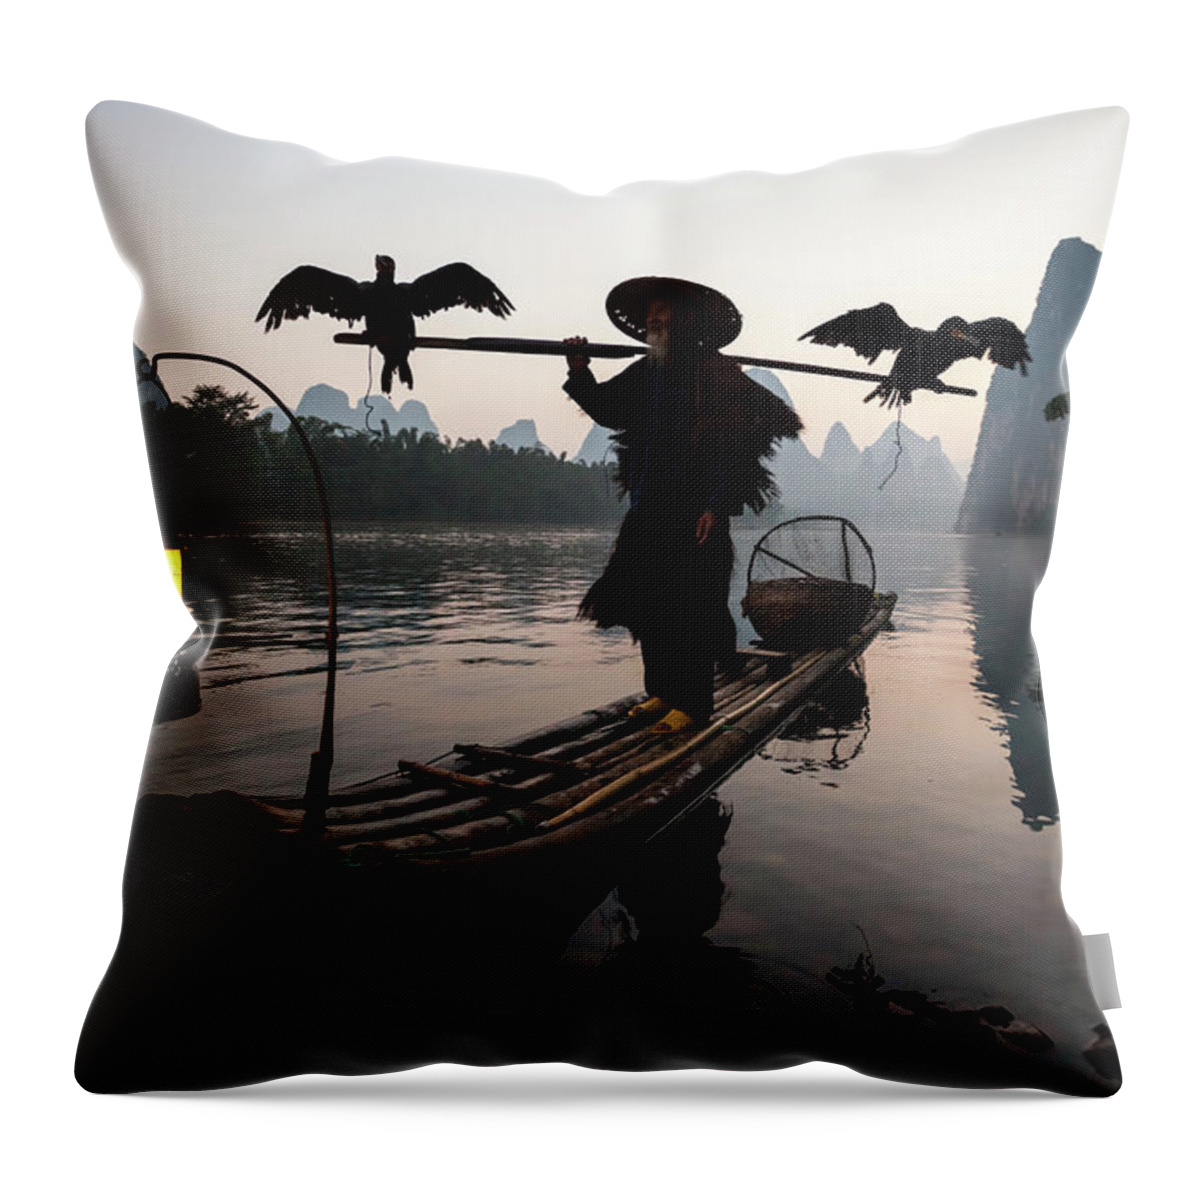 Chinese Culture Throw Pillow featuring the photograph Fisherman With Cormorants On Li River #1 by Matteo Colombo